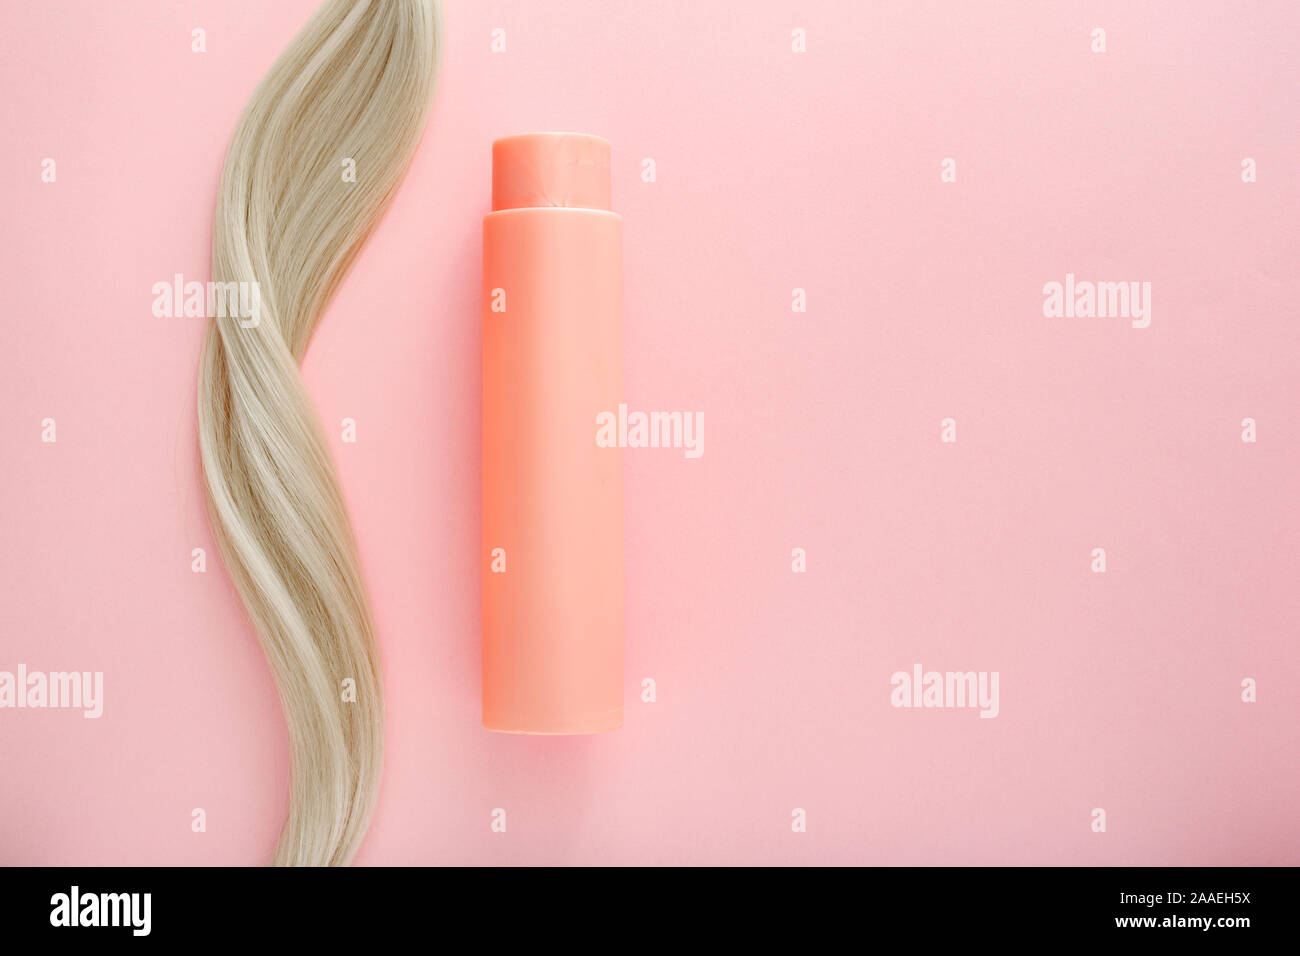 Shampoo For Colored Hair Mockup Bottle Shampoo For Blond Pink